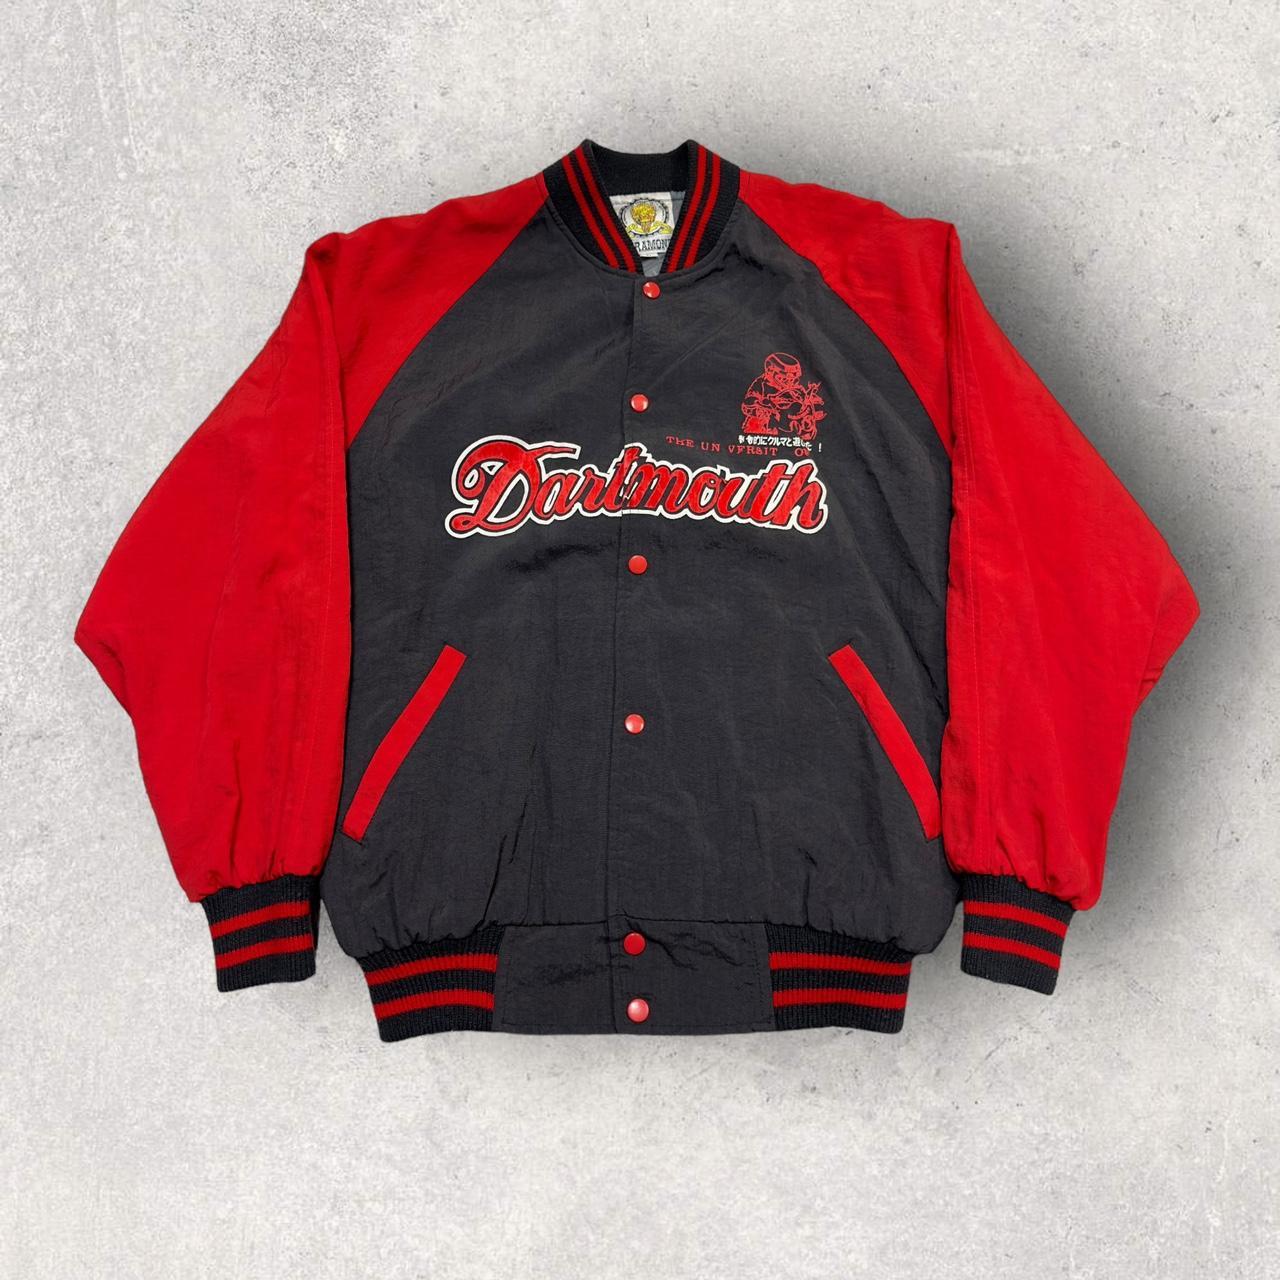 Vintage Dartmouth jacket in black and red. From the... - Depop